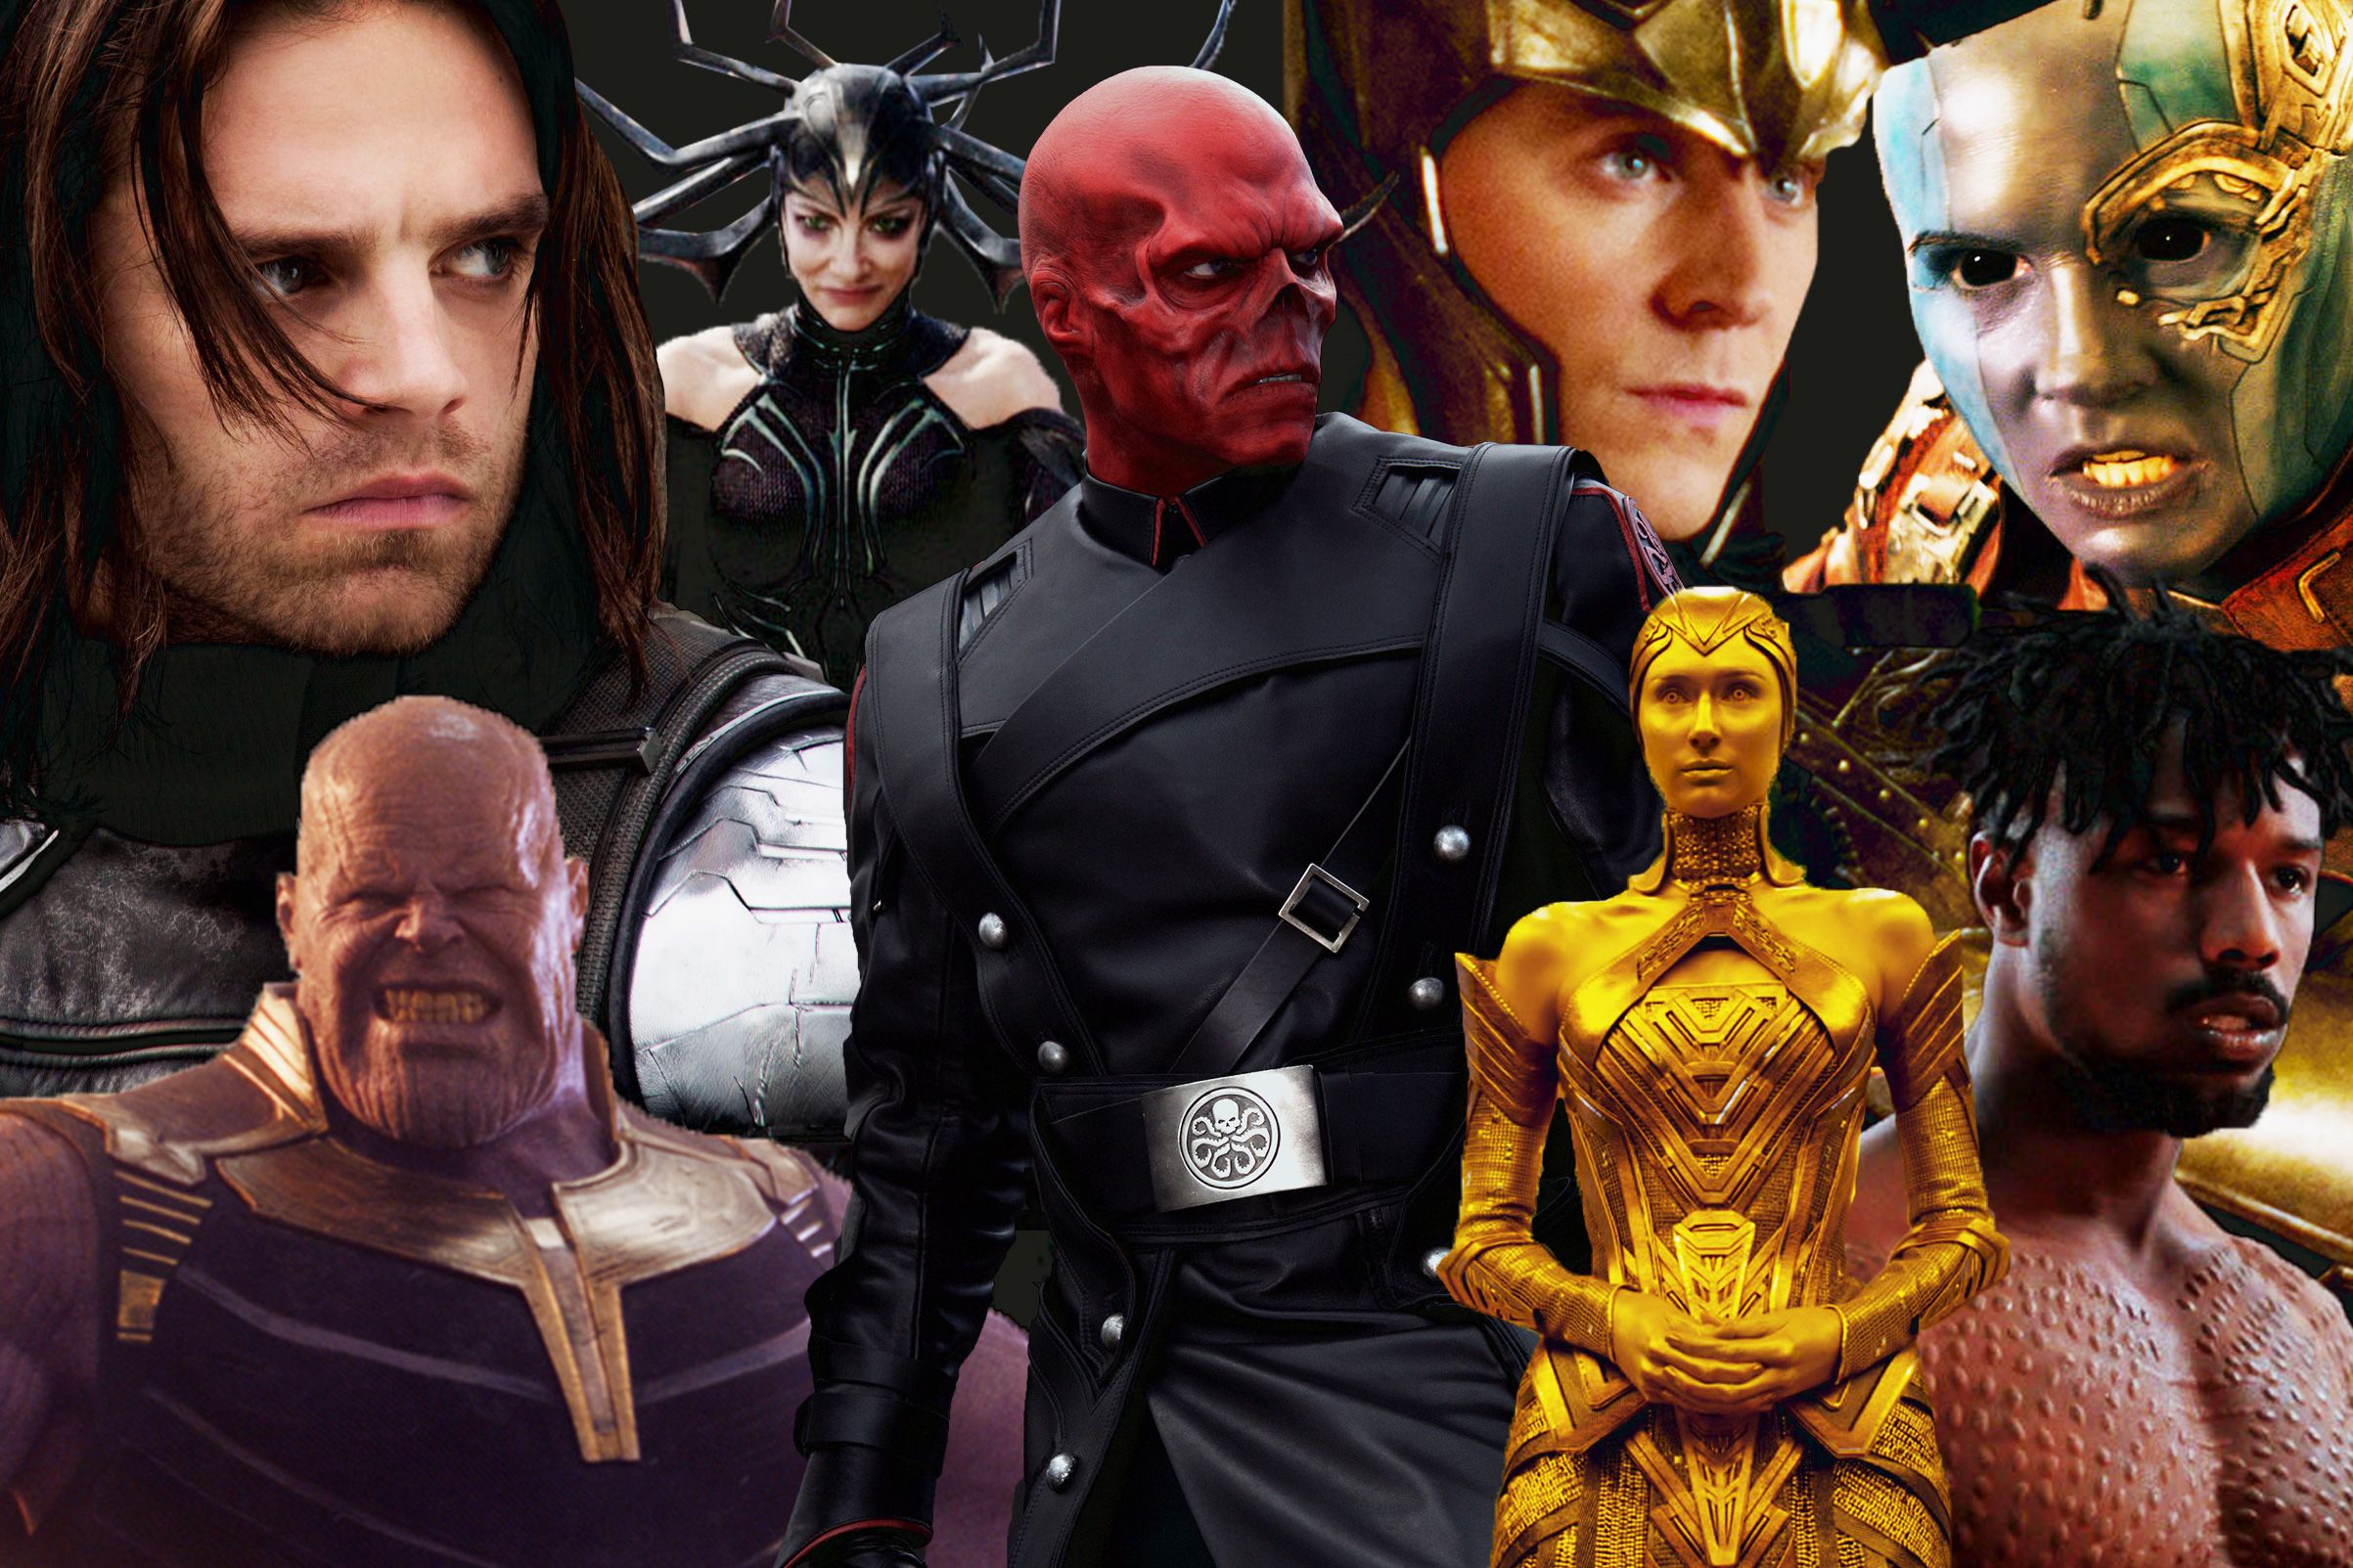 Marvel Cinematic Universe Villains Ranked From Worst to Best